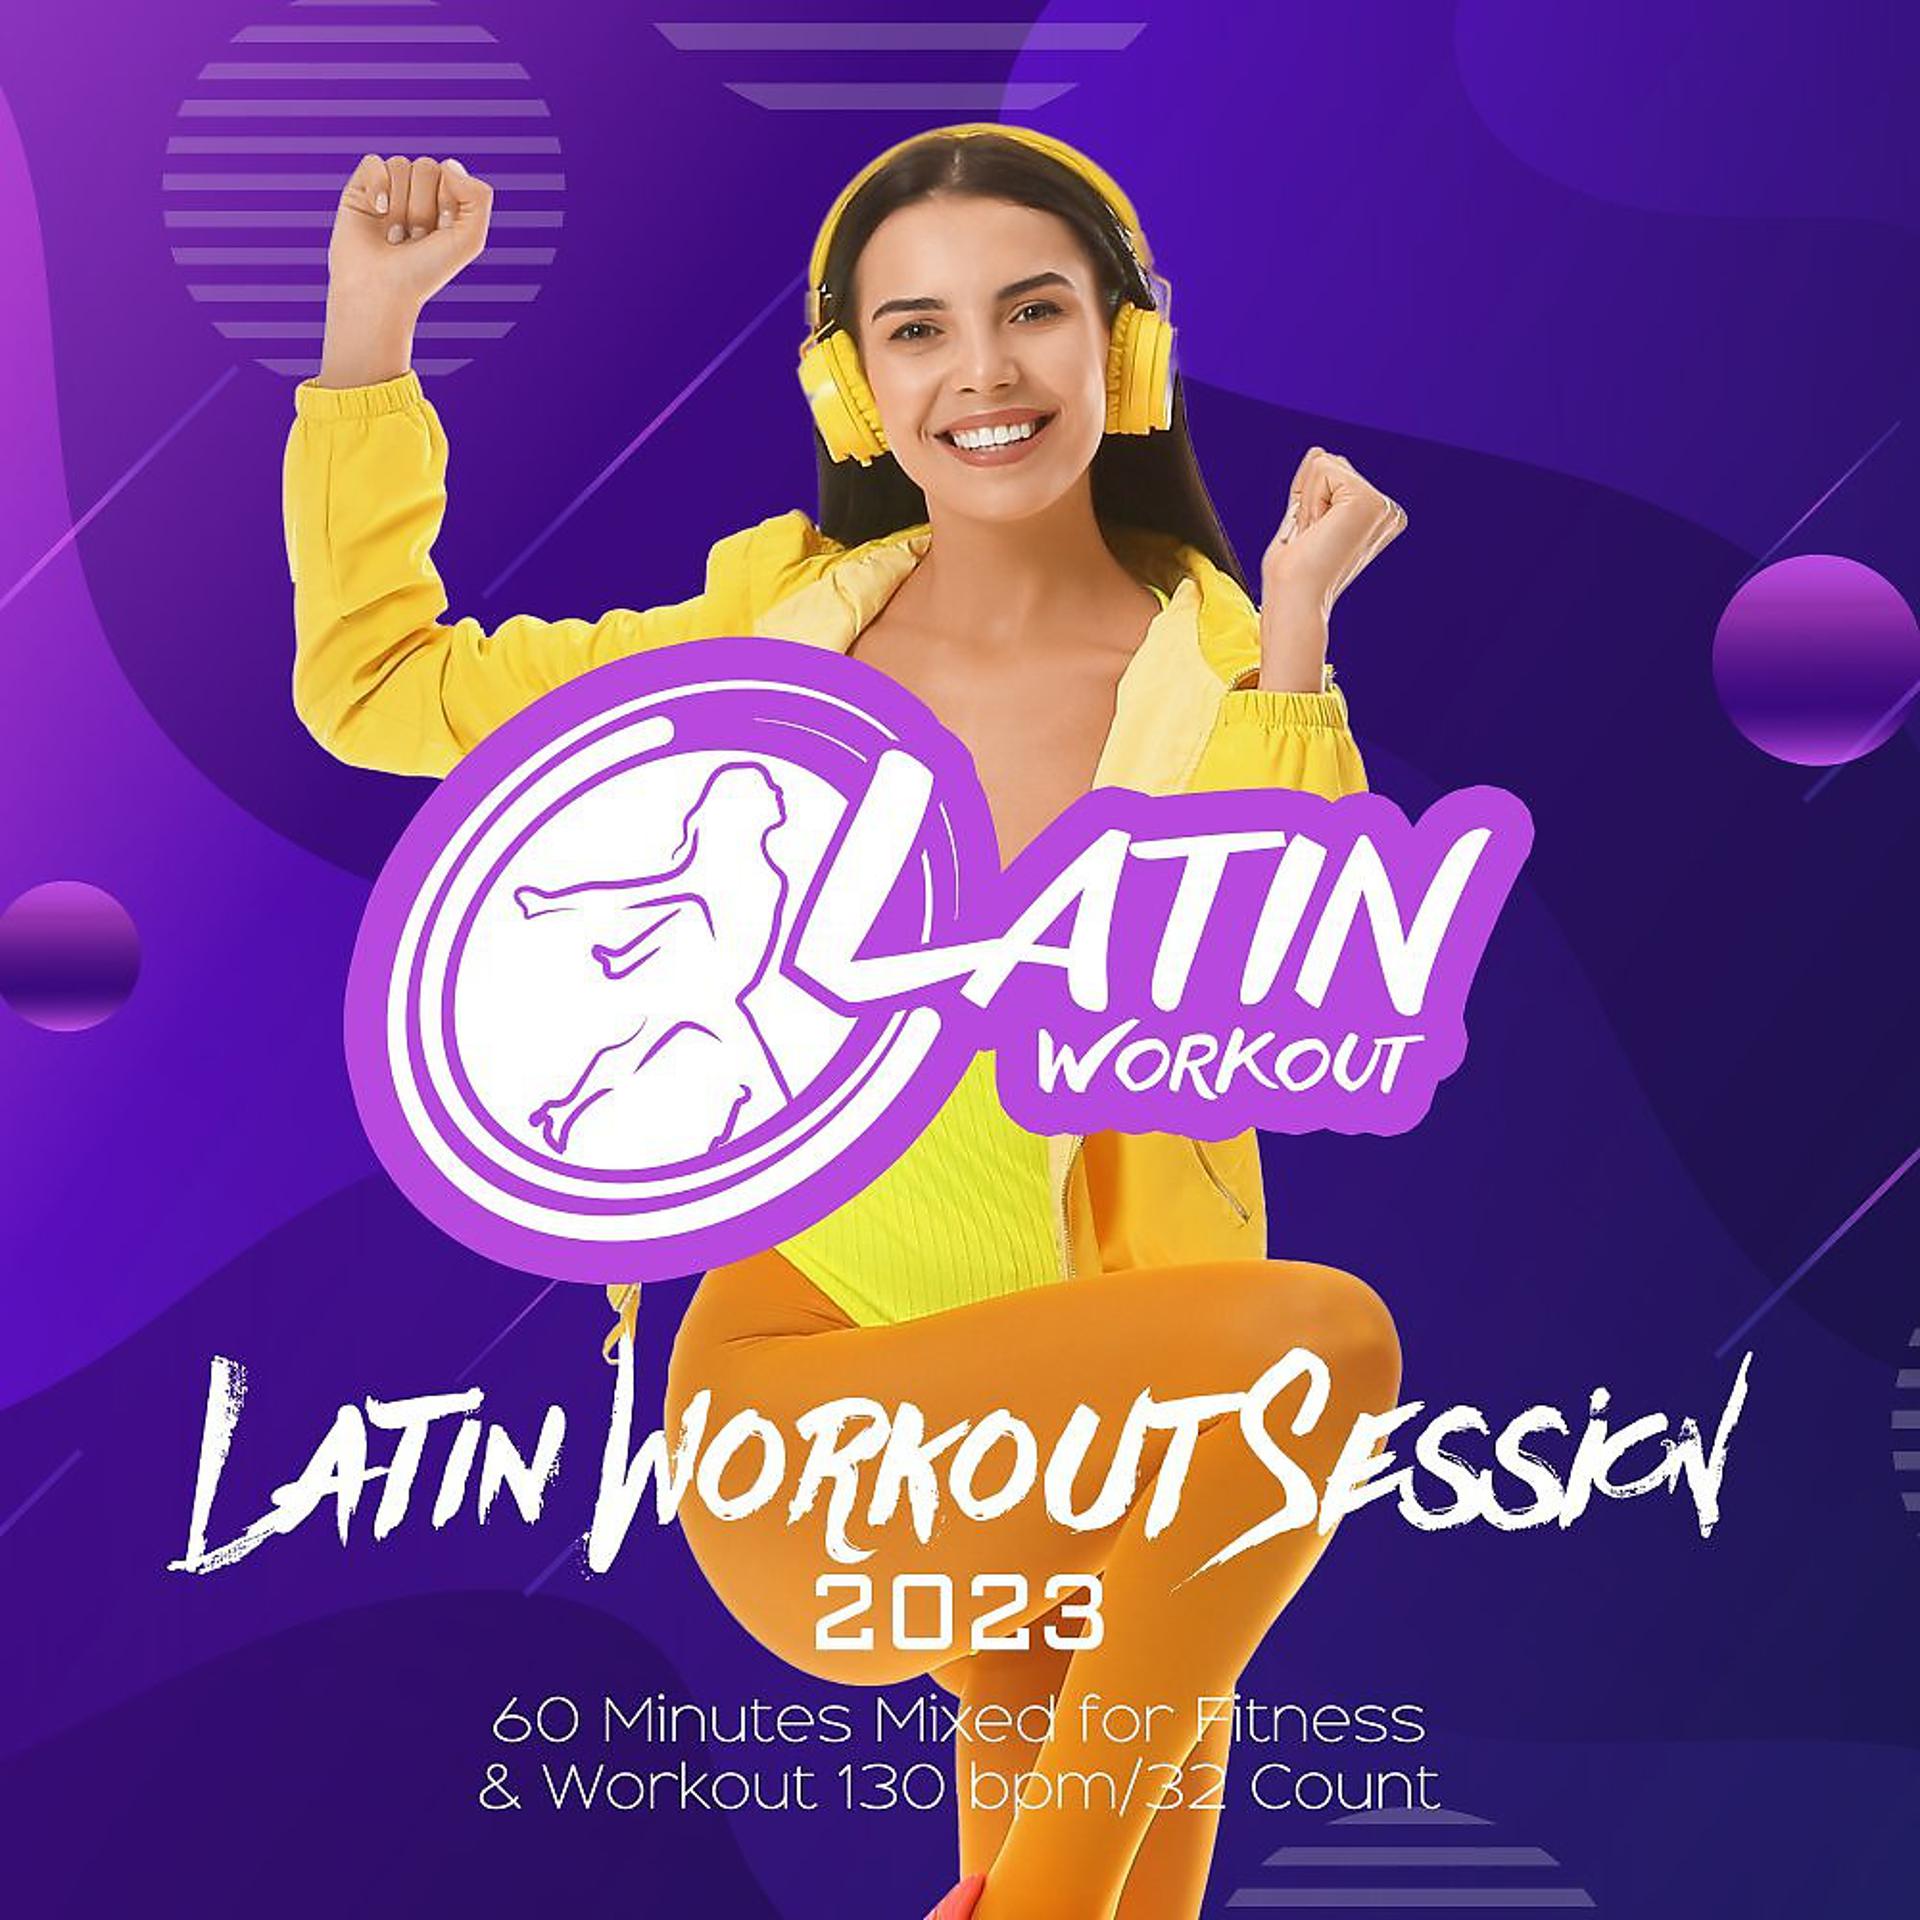 Постер альбома Latin Workout Session 2023: 60 Minutes Mixed for Fitness & Workout 130 bpm/32 Count